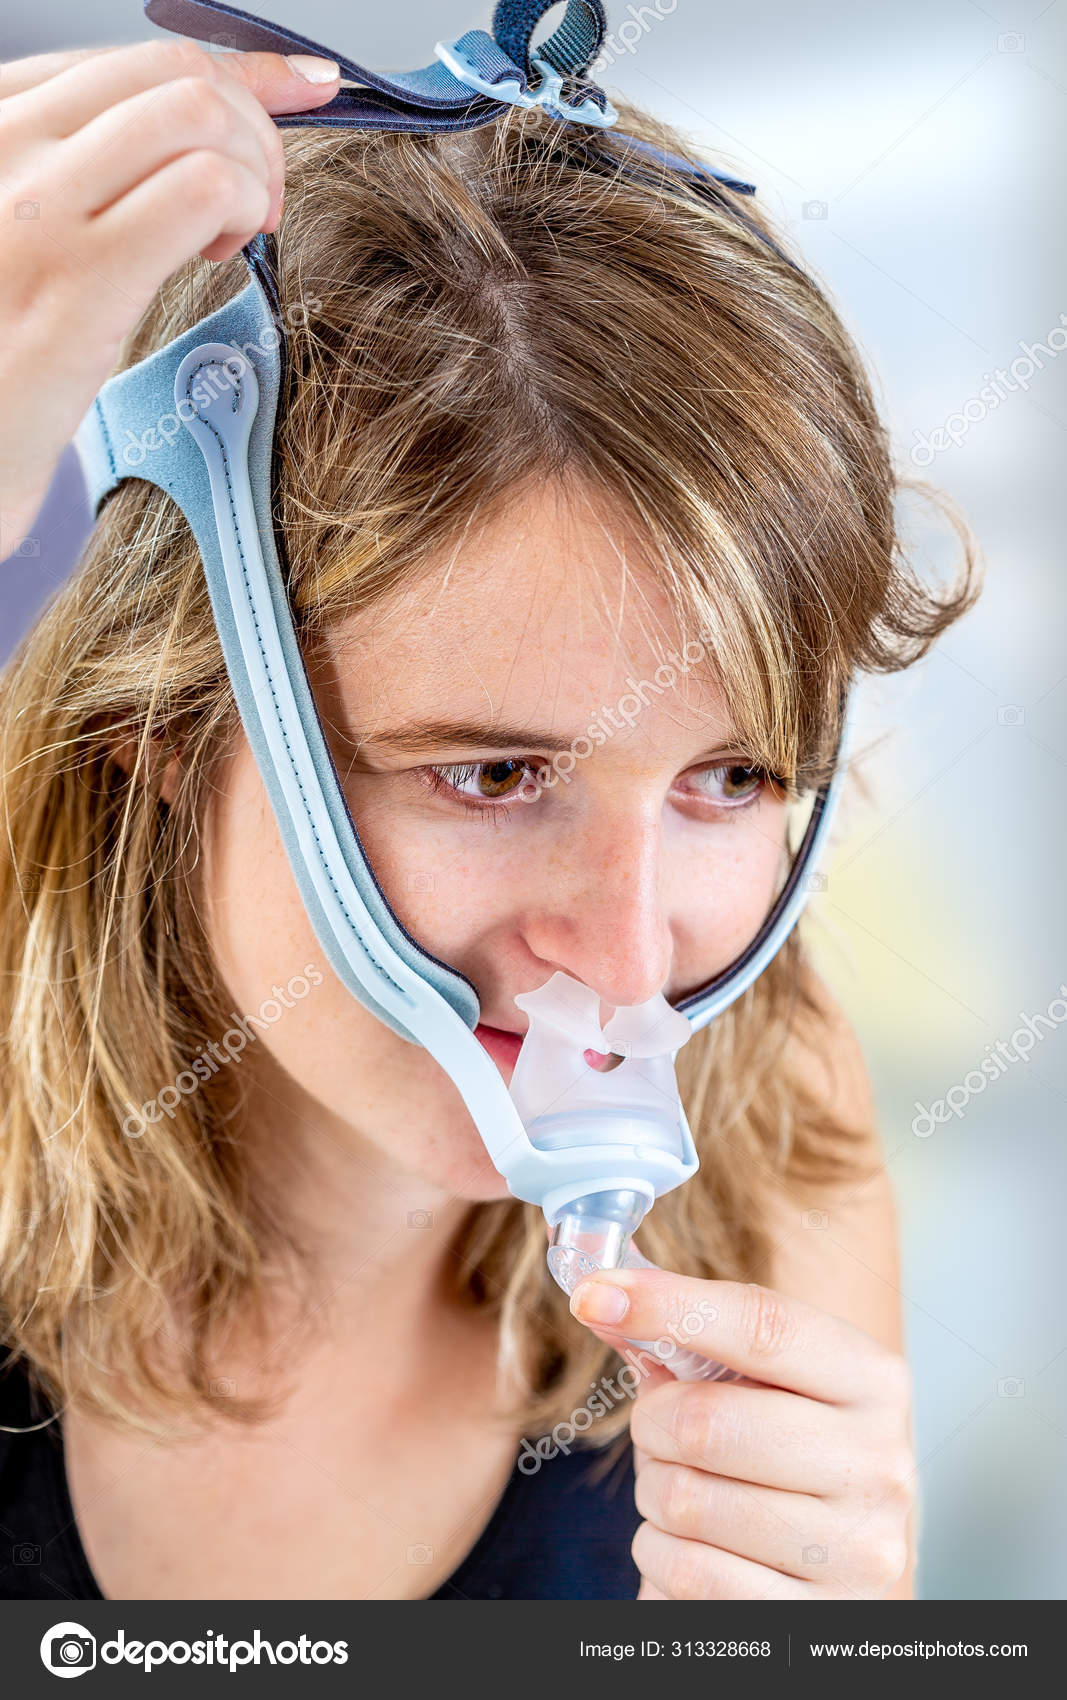 Kriger Tag det op Have en picnic Woman trying to wear CPAP mask, sleep apnea therapy. Stock Photo by  ©JPCPROD 313328668